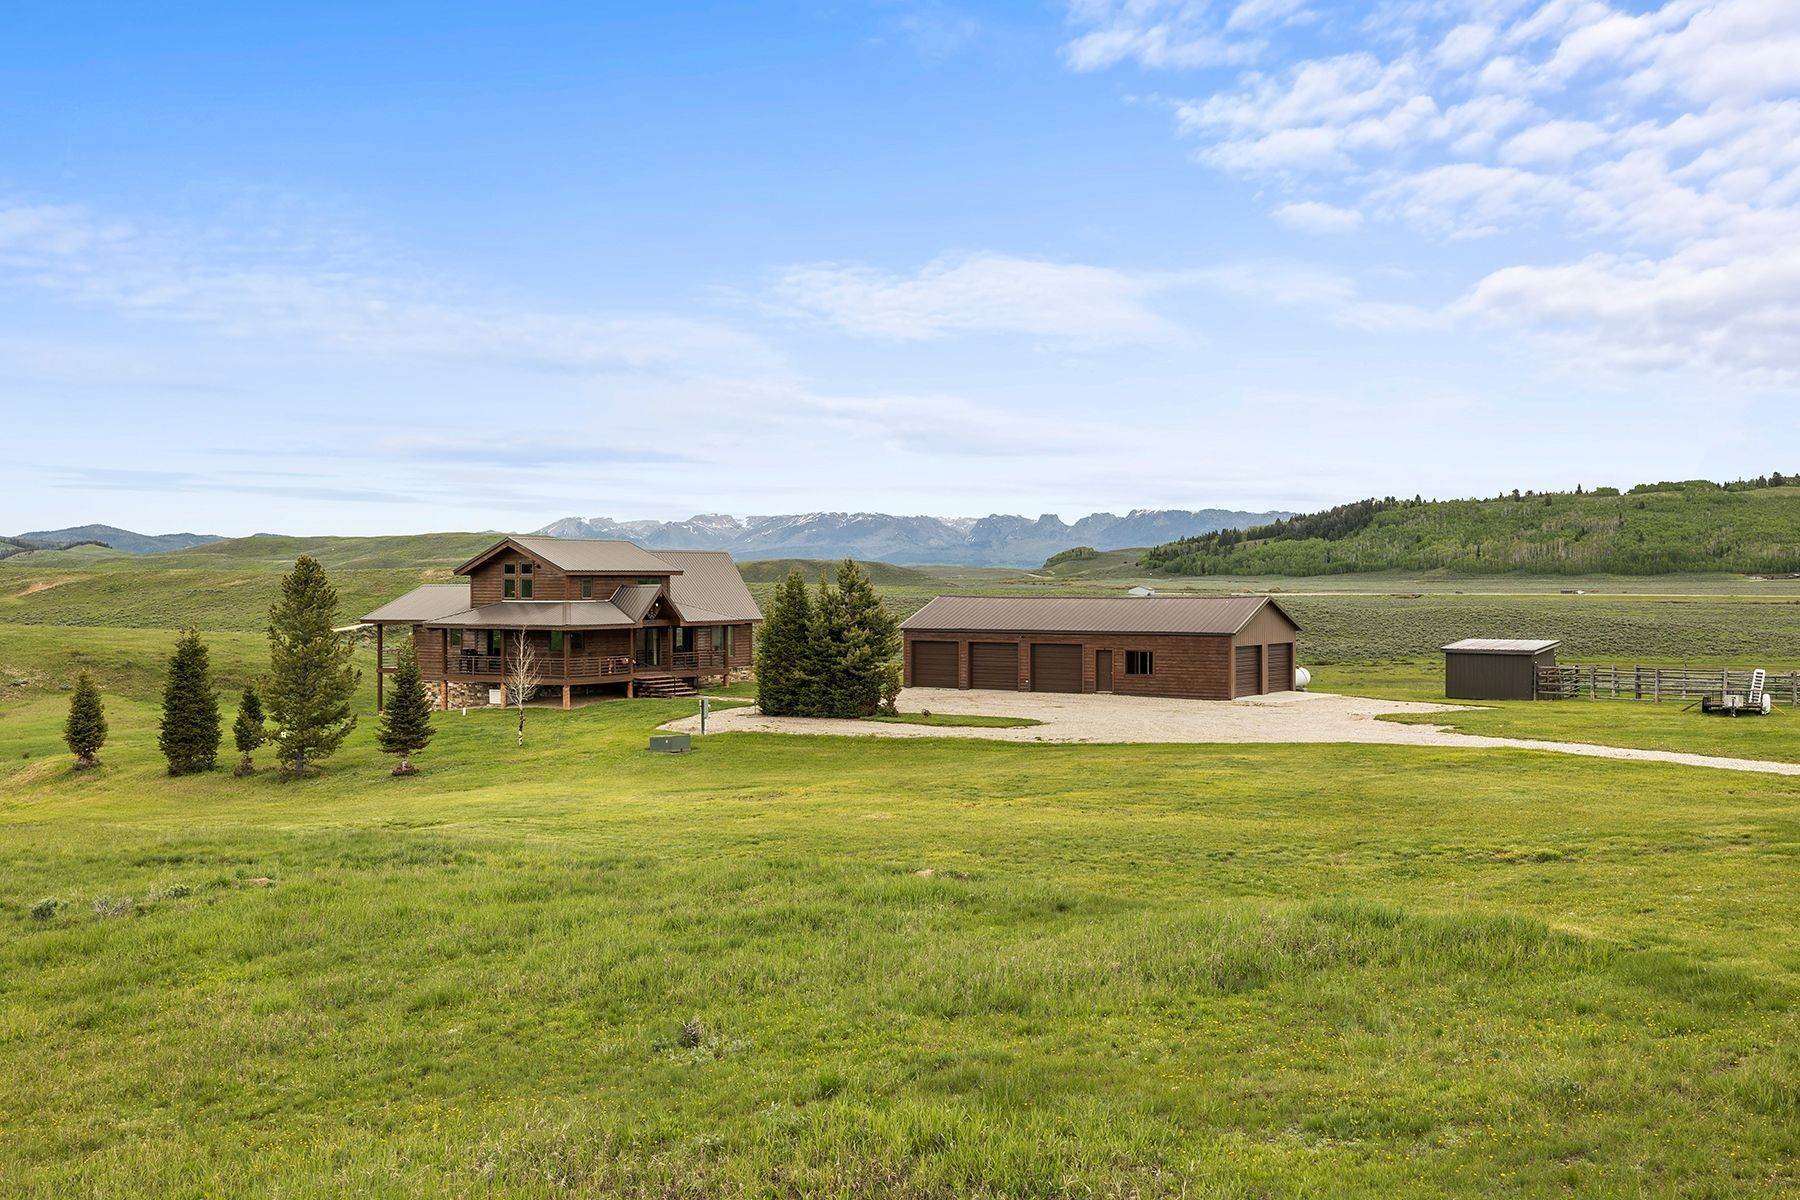 Single Family Homes for Sale at Tasteful Mountain Home with Stunning Views 79 Rim Road Bondurant, Wyoming 82922 United States